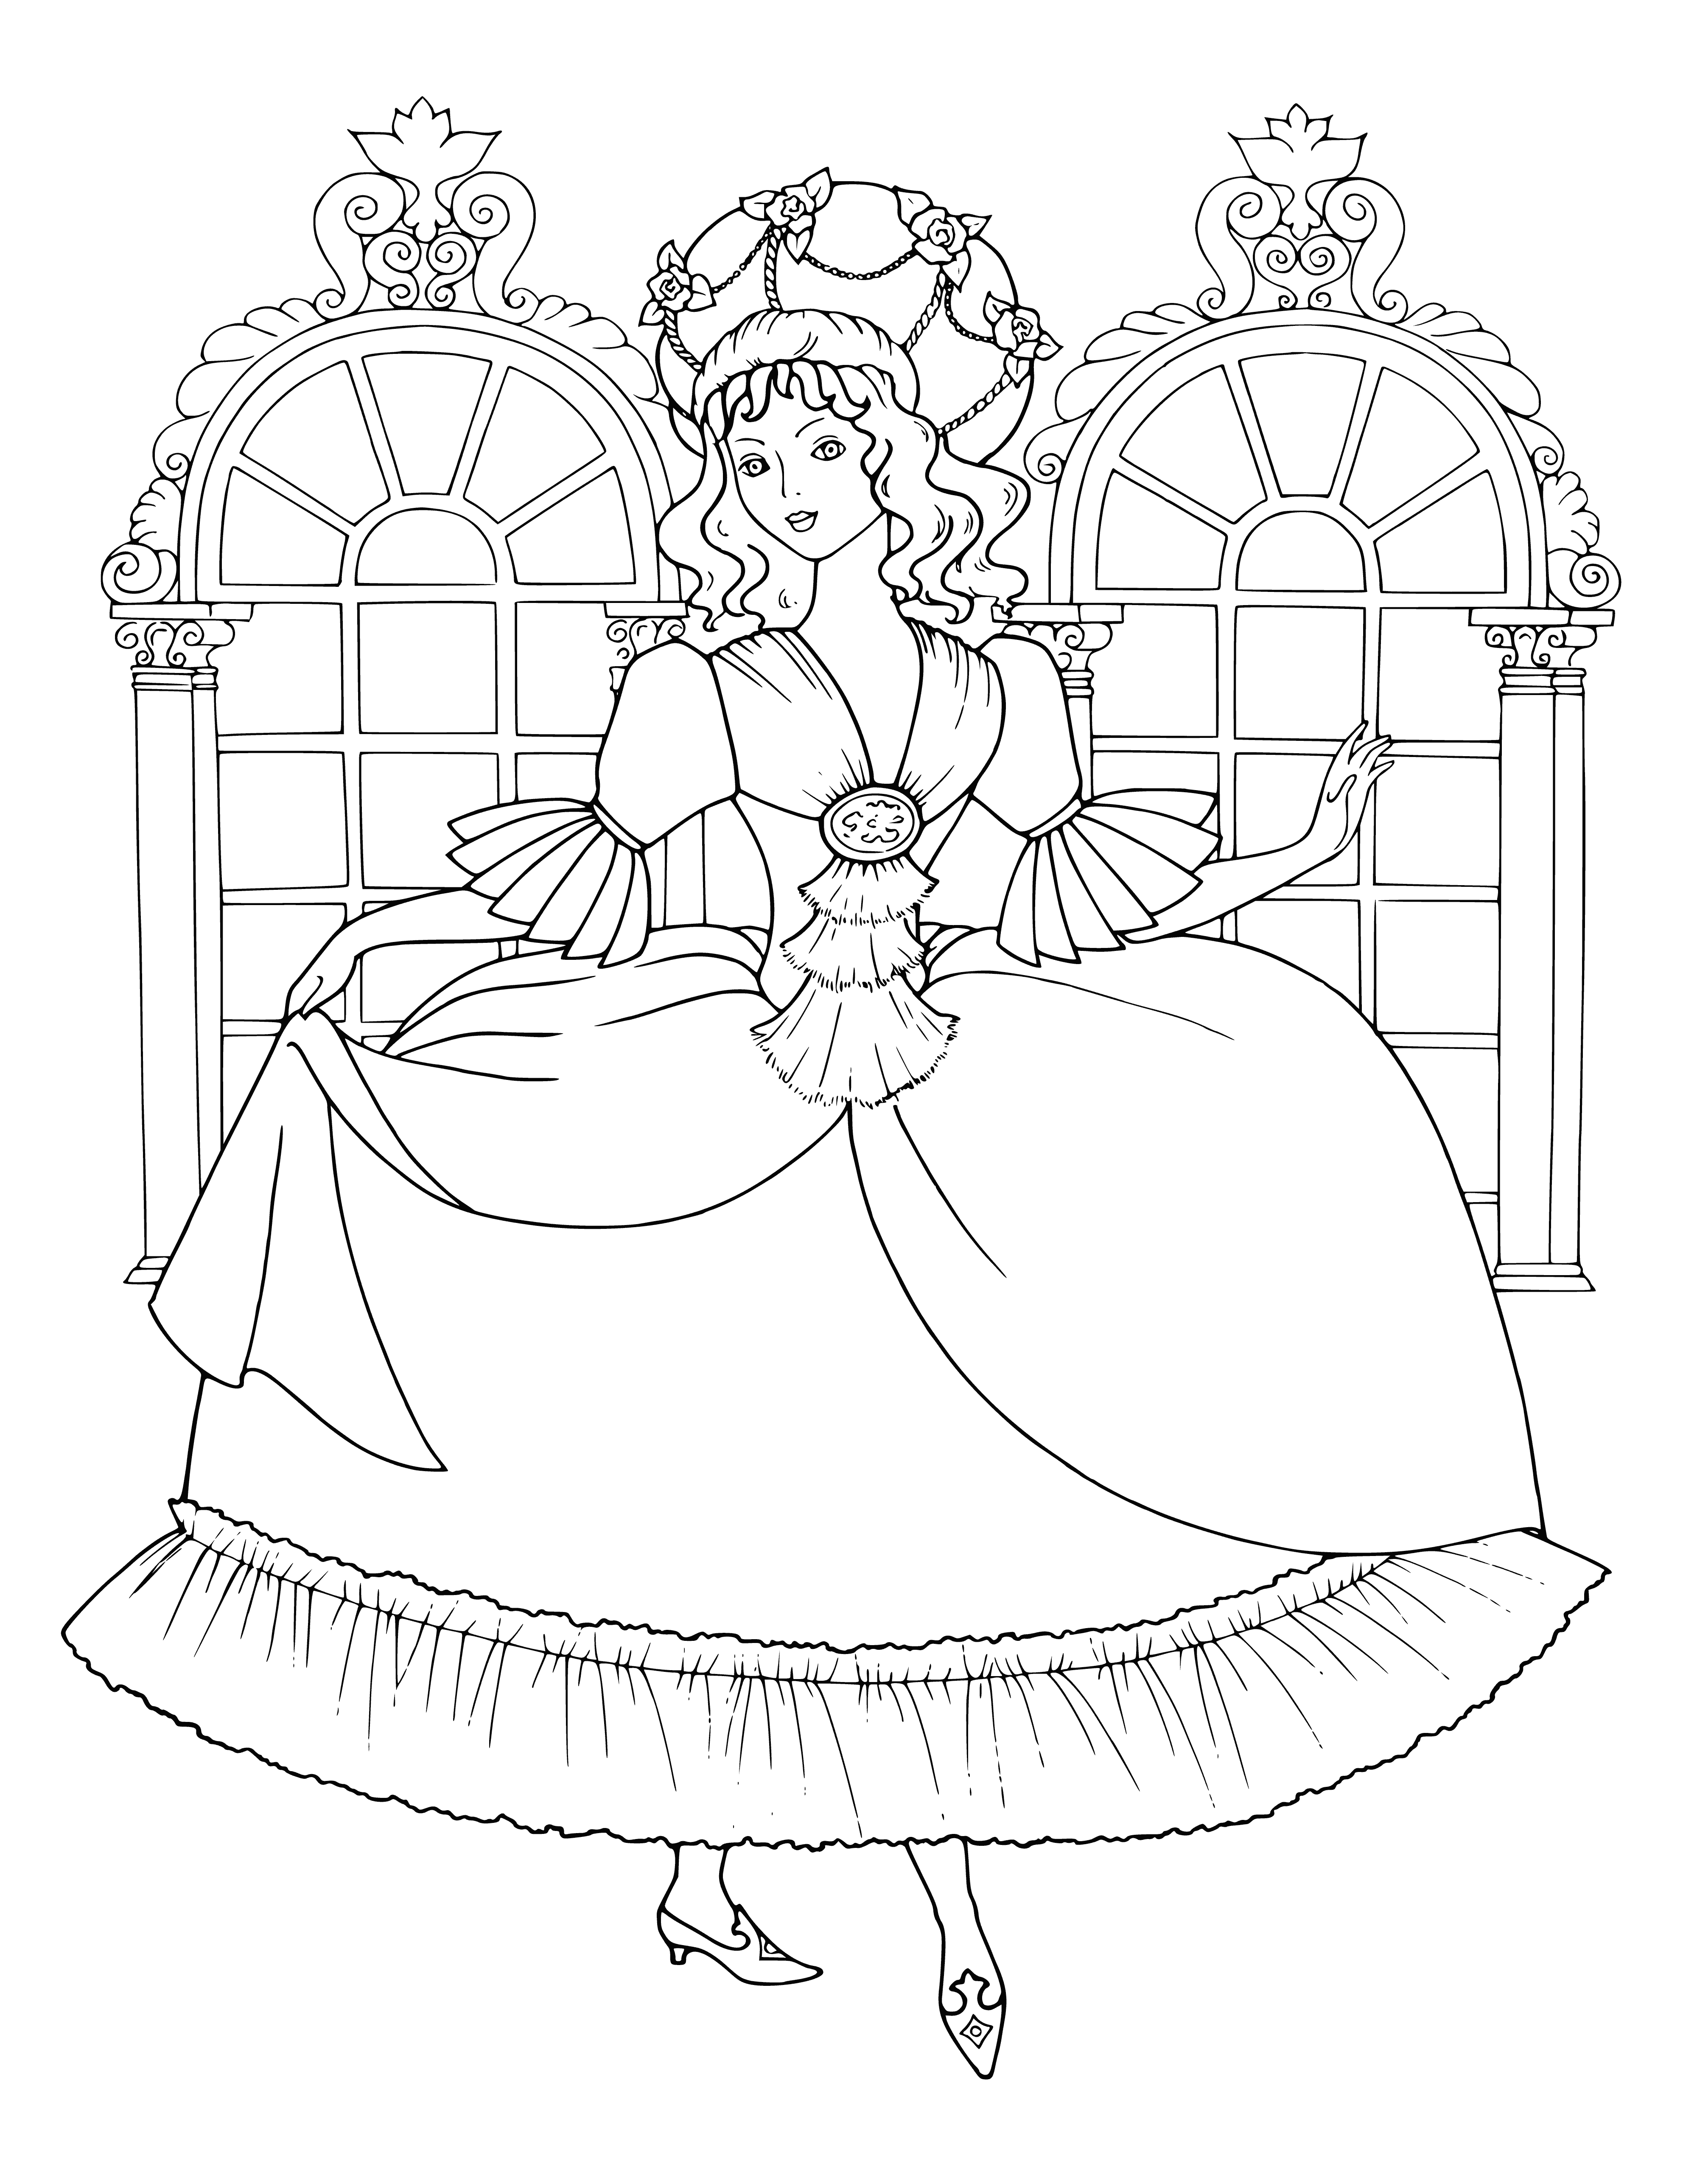 coloring page: Girl in pink dress with long, curly hair stands in front of a mirror, new shoes on, smiling with joy.